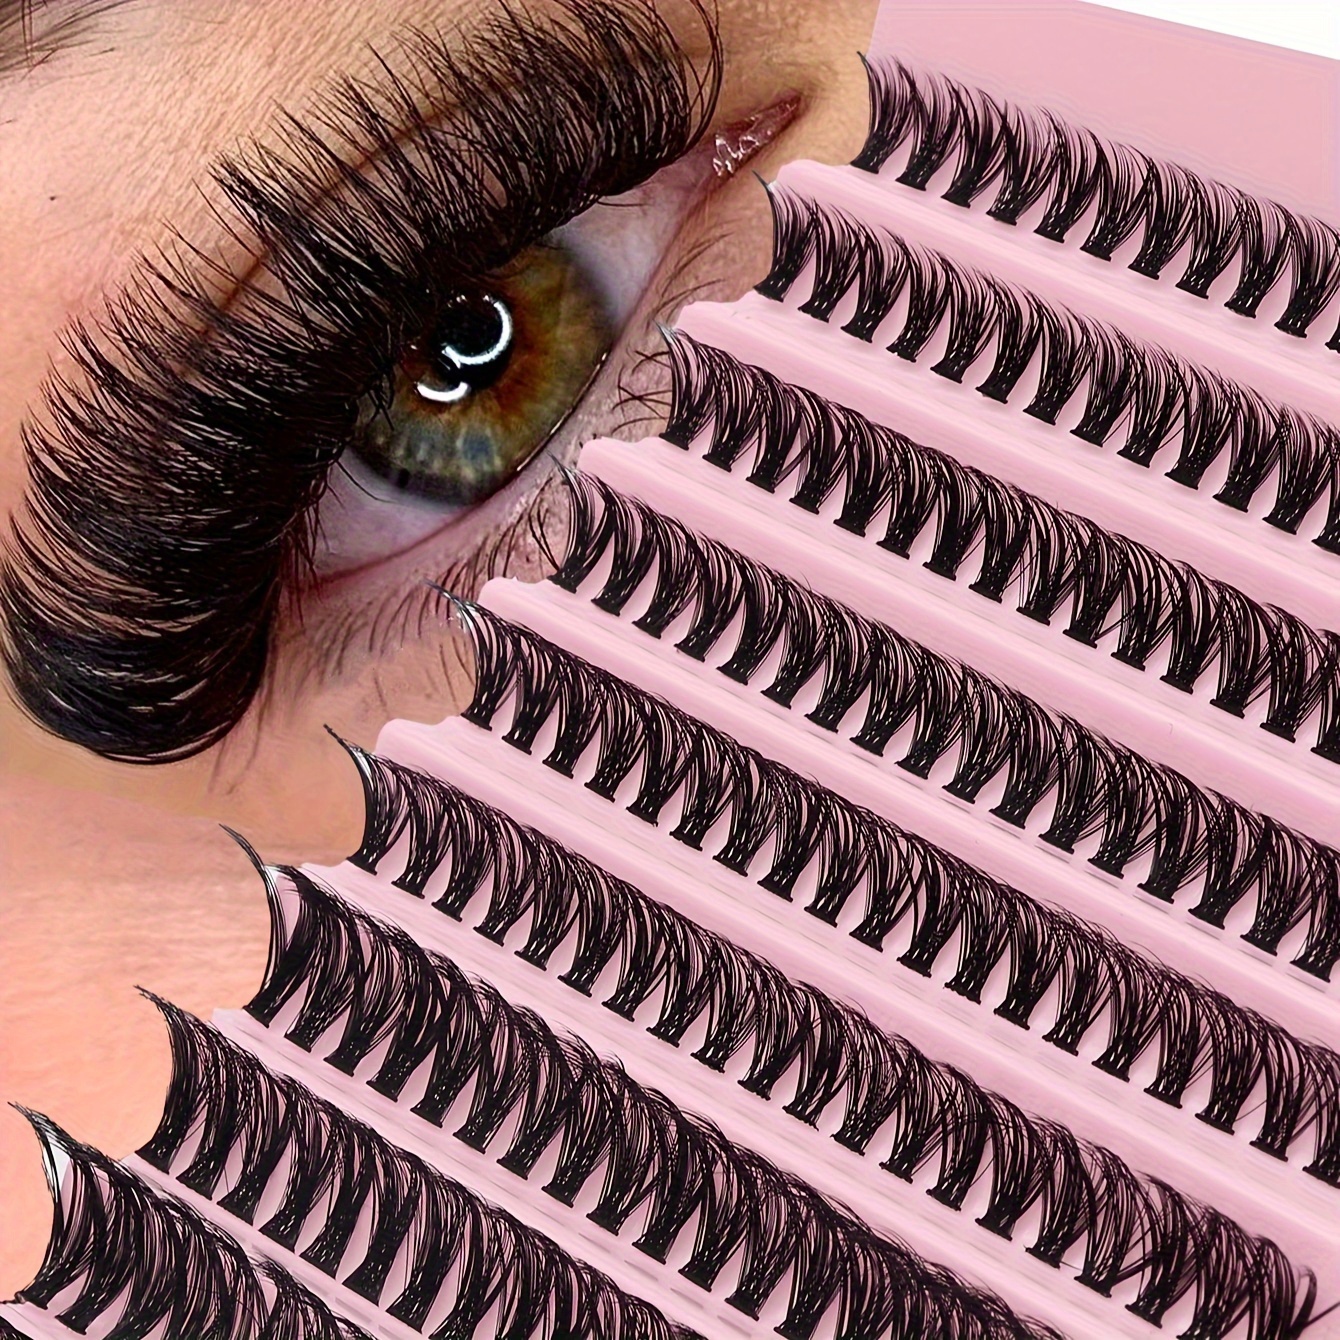 

30d/40d/80d 200 Clusters Lashes, D Curling Volume Individual Lashes Extensions, Wispy Lashes Cluster Diy At Home ( D-10-16 Mix ) Grafting Lashes 0.07mm Makeup Cat Eye Lash